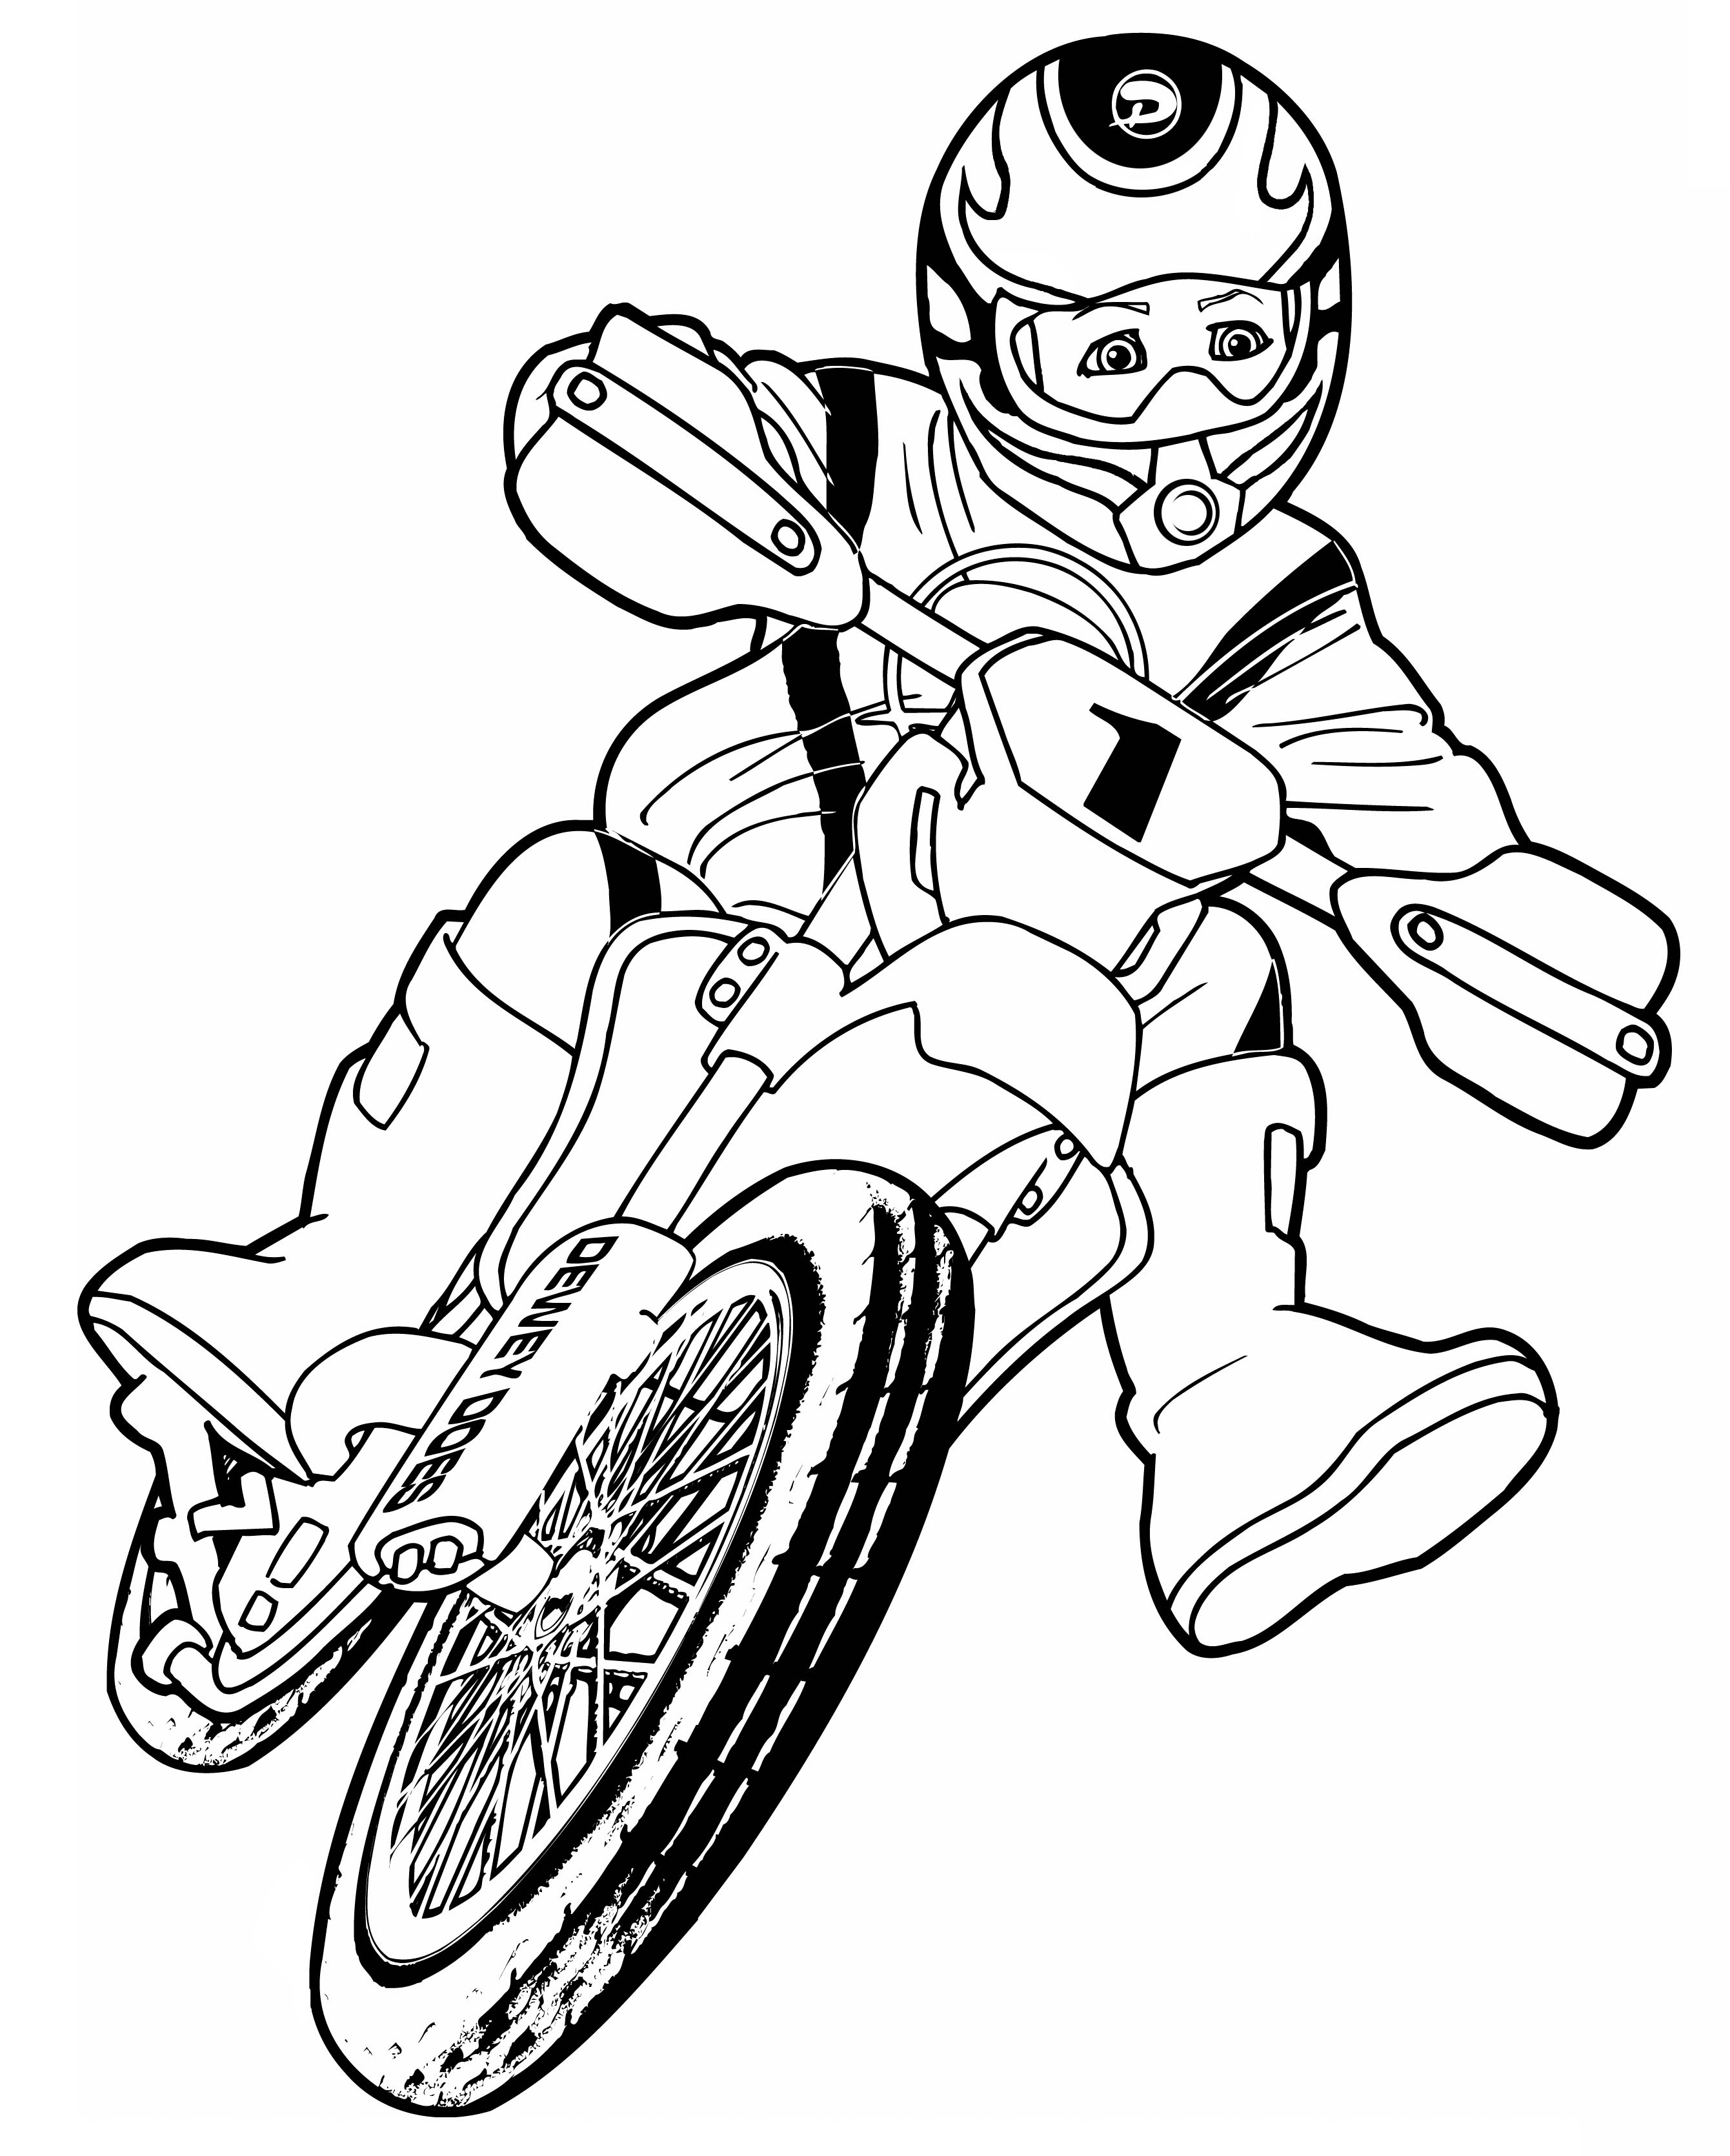 Bike Helmet Coloring Page Free Coloring Pages Dirt Bikes